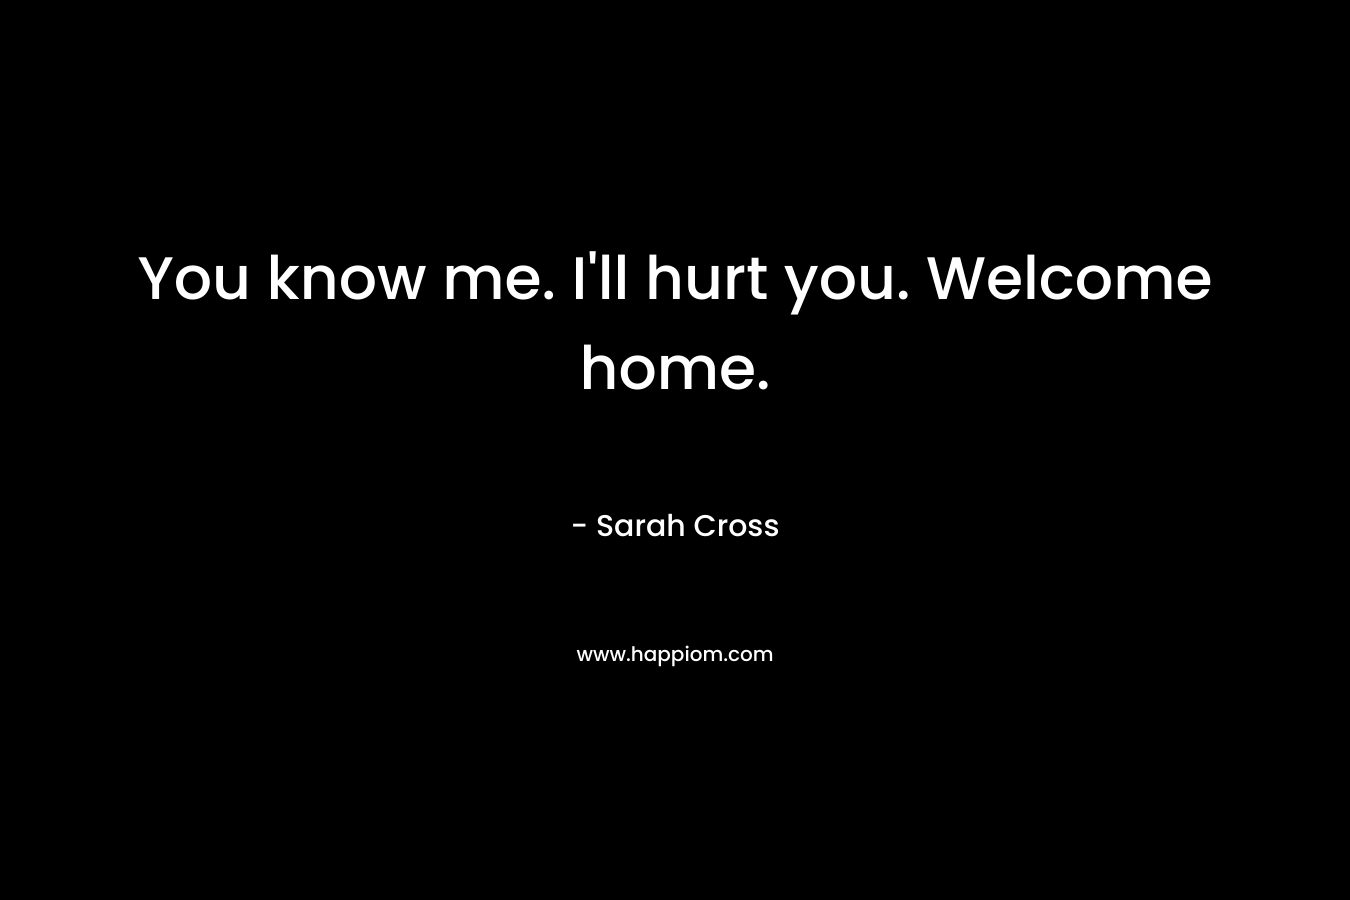 You know me. I'll hurt you. Welcome home.